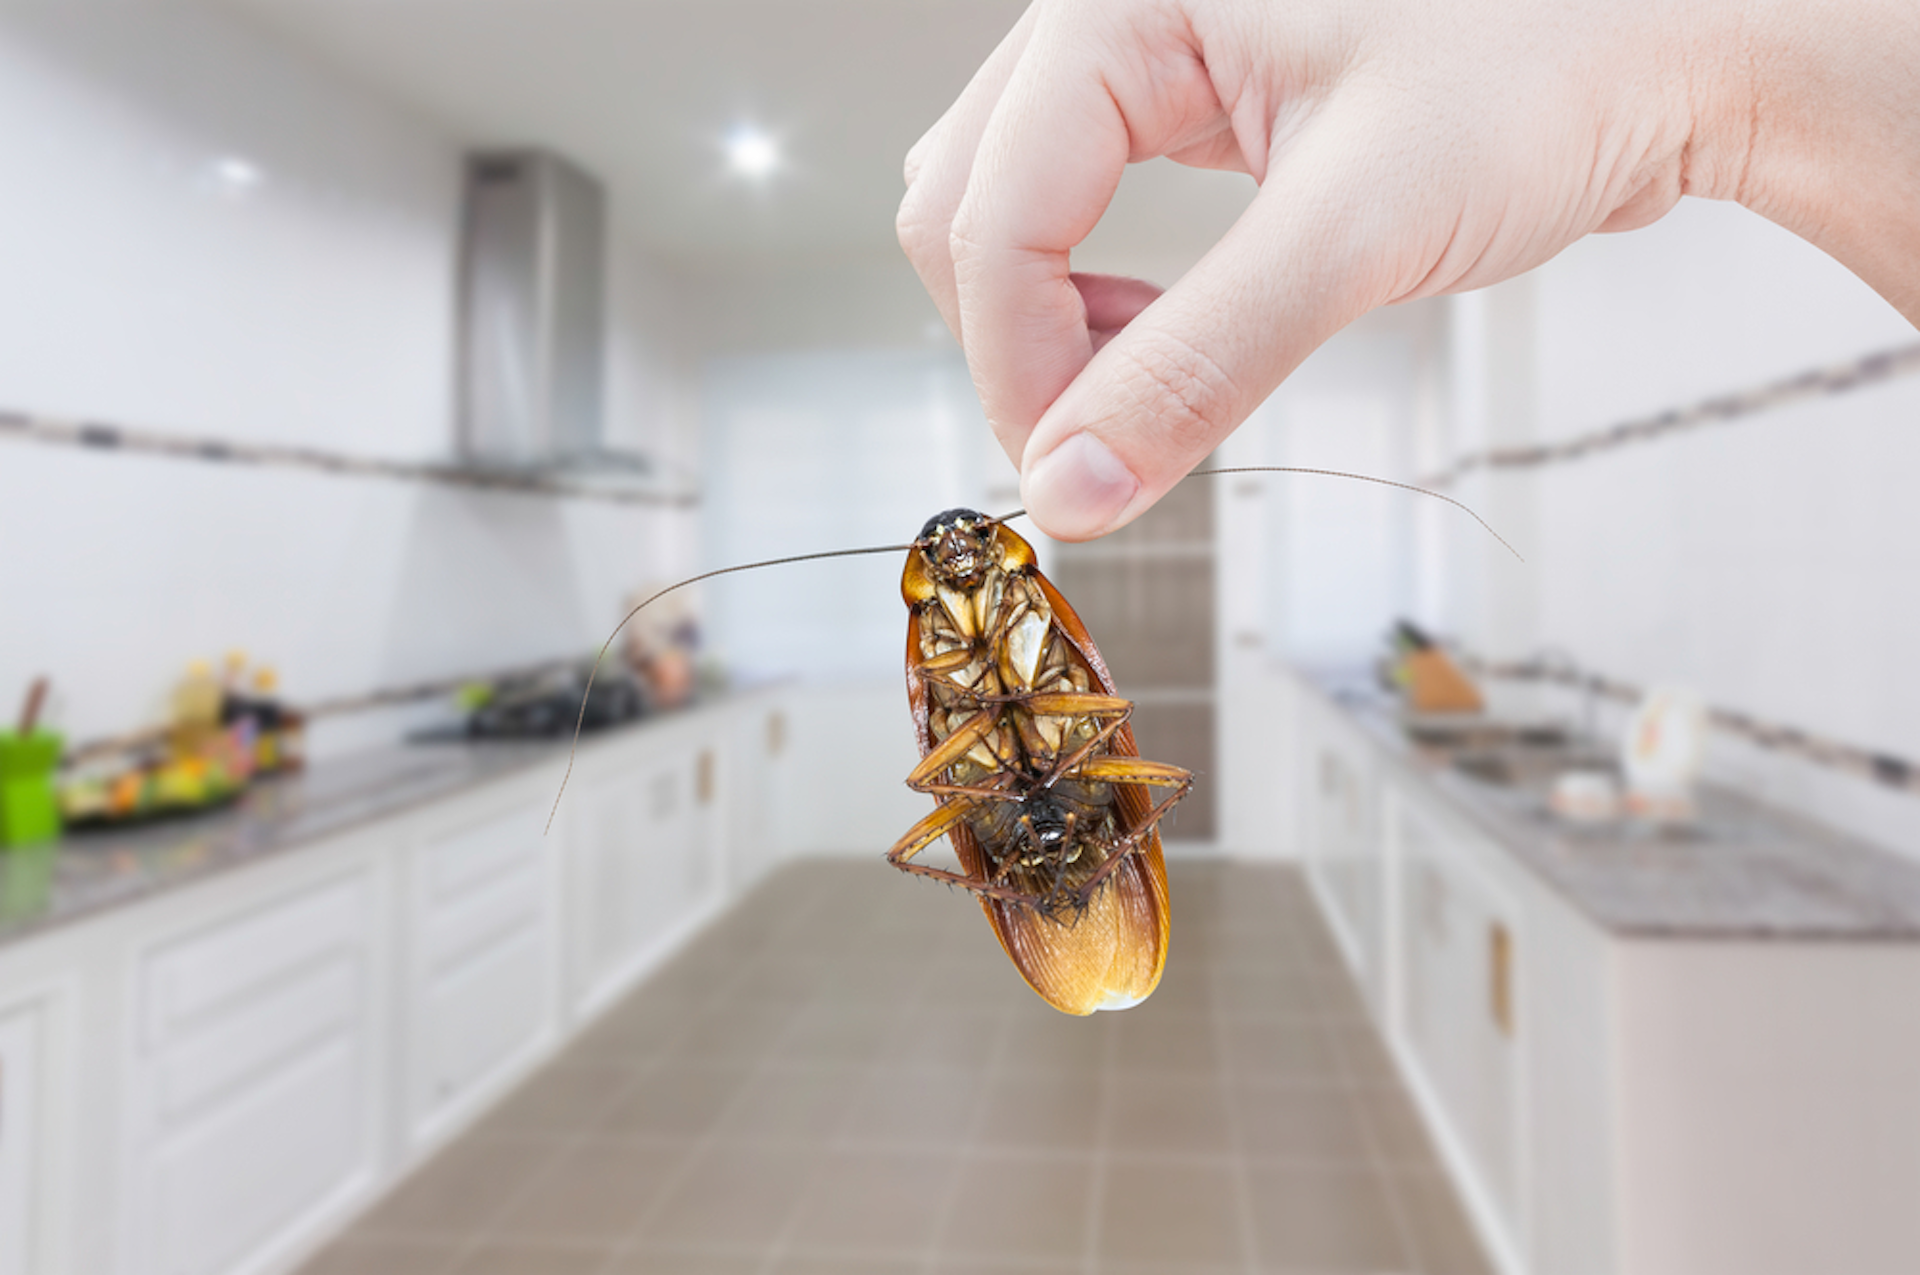 cockroach can travel up to 3 miles in an hour